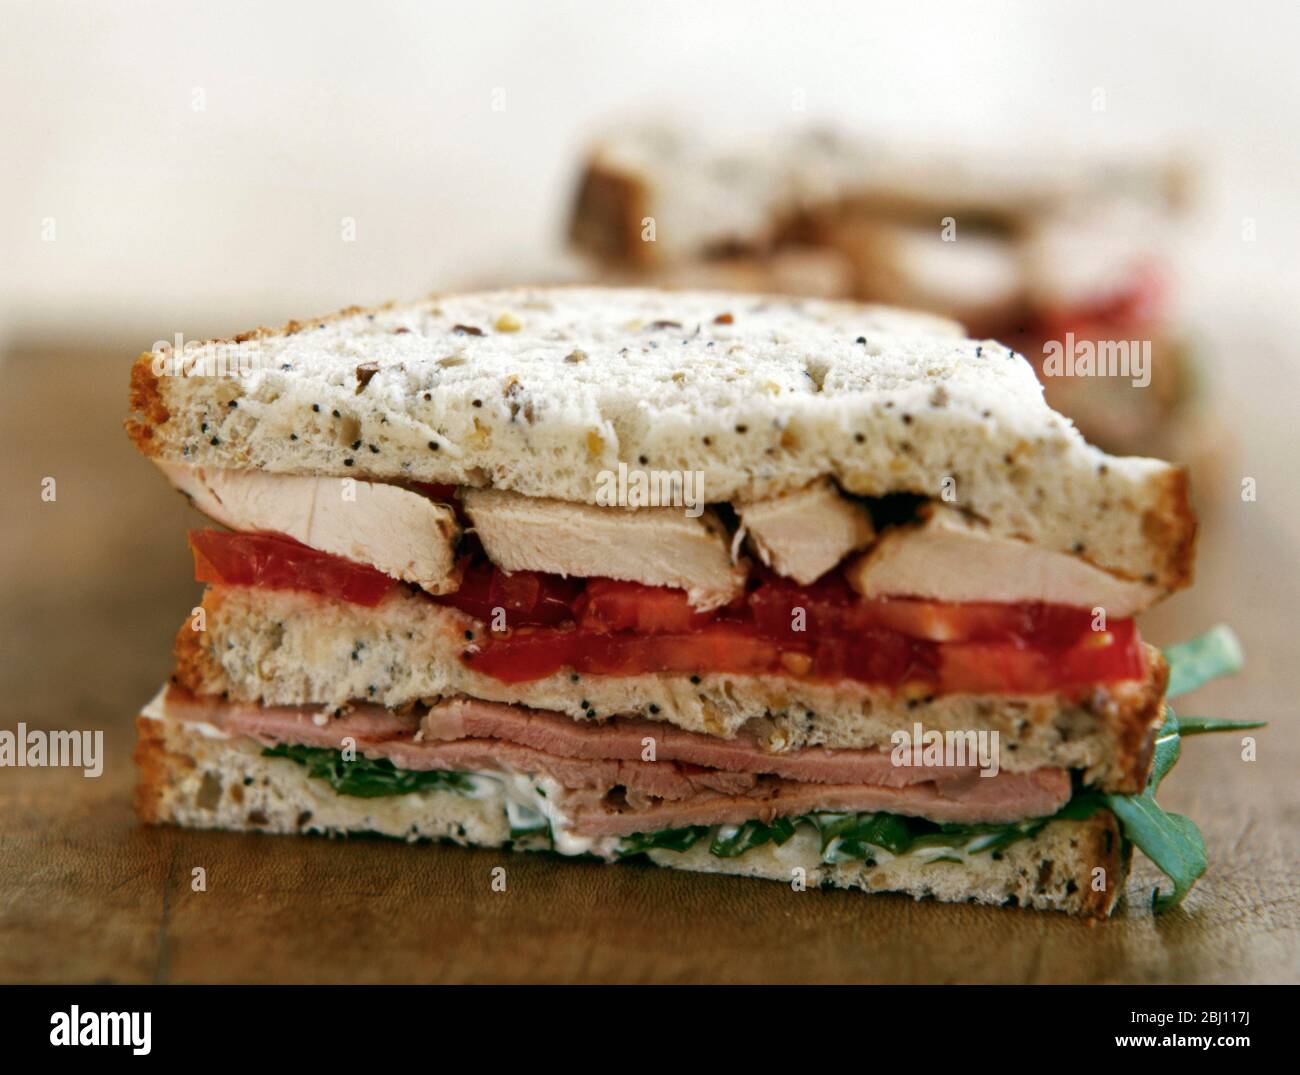 Sandwich of chicken, tomato, ham and salad on seeded bread - Stock Photo